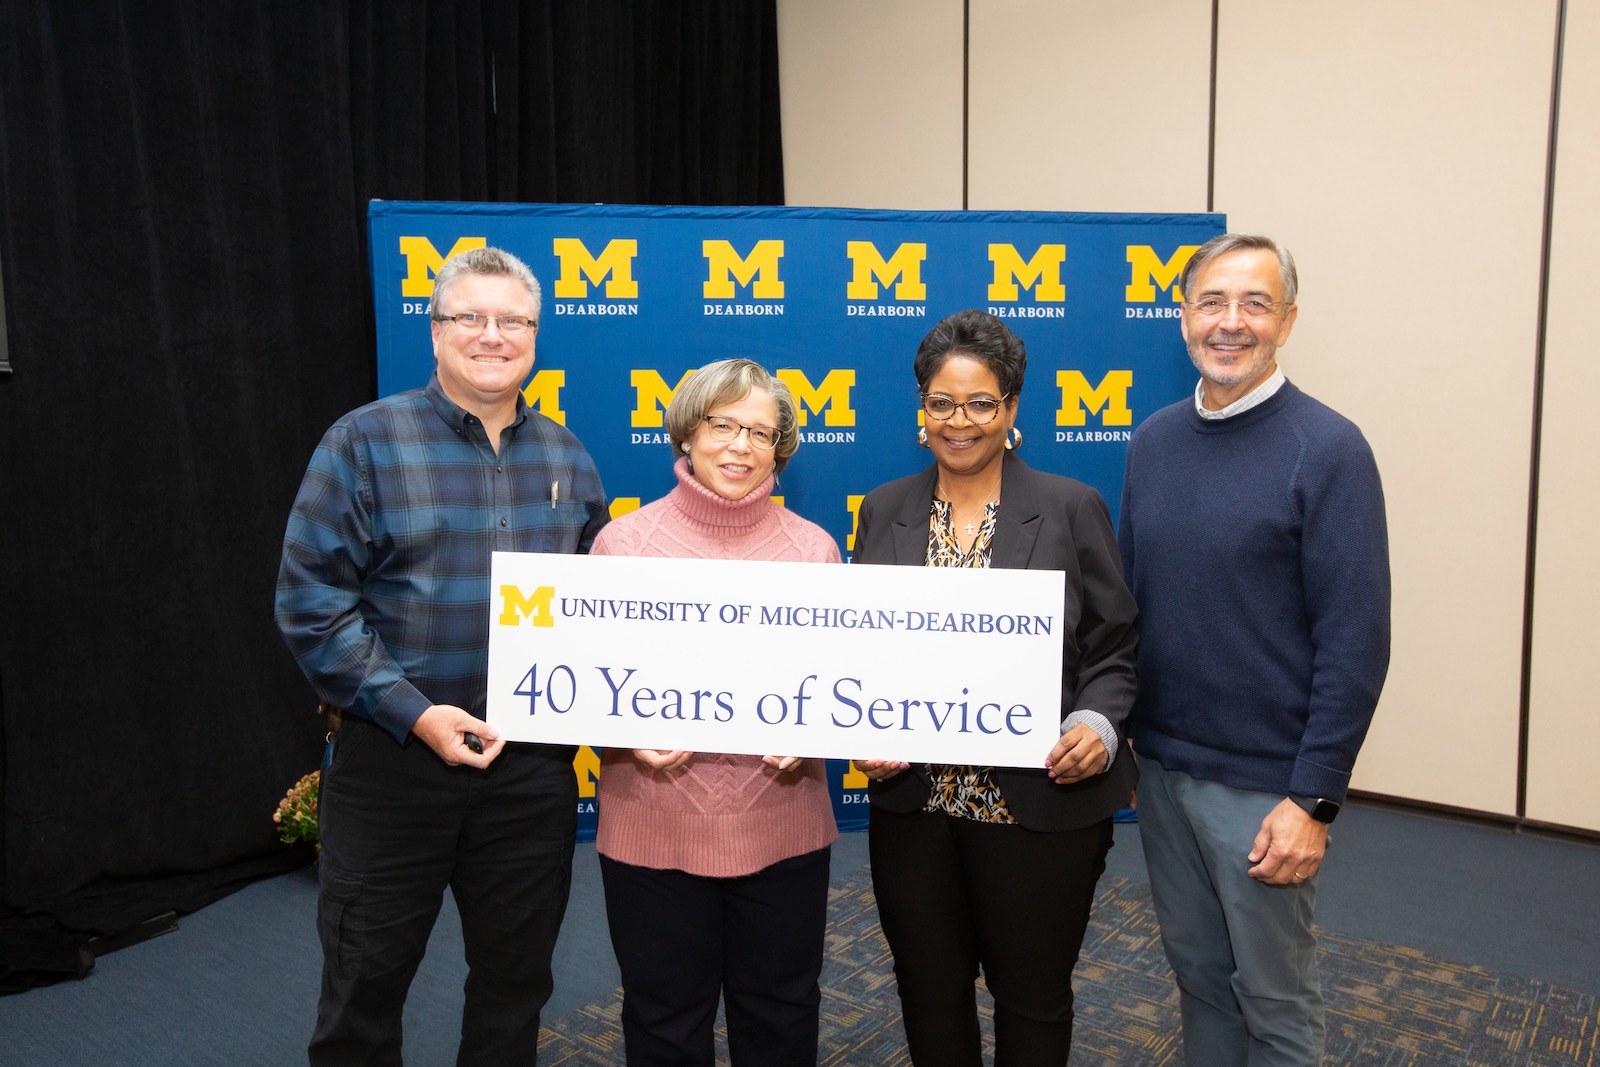 40 years of service